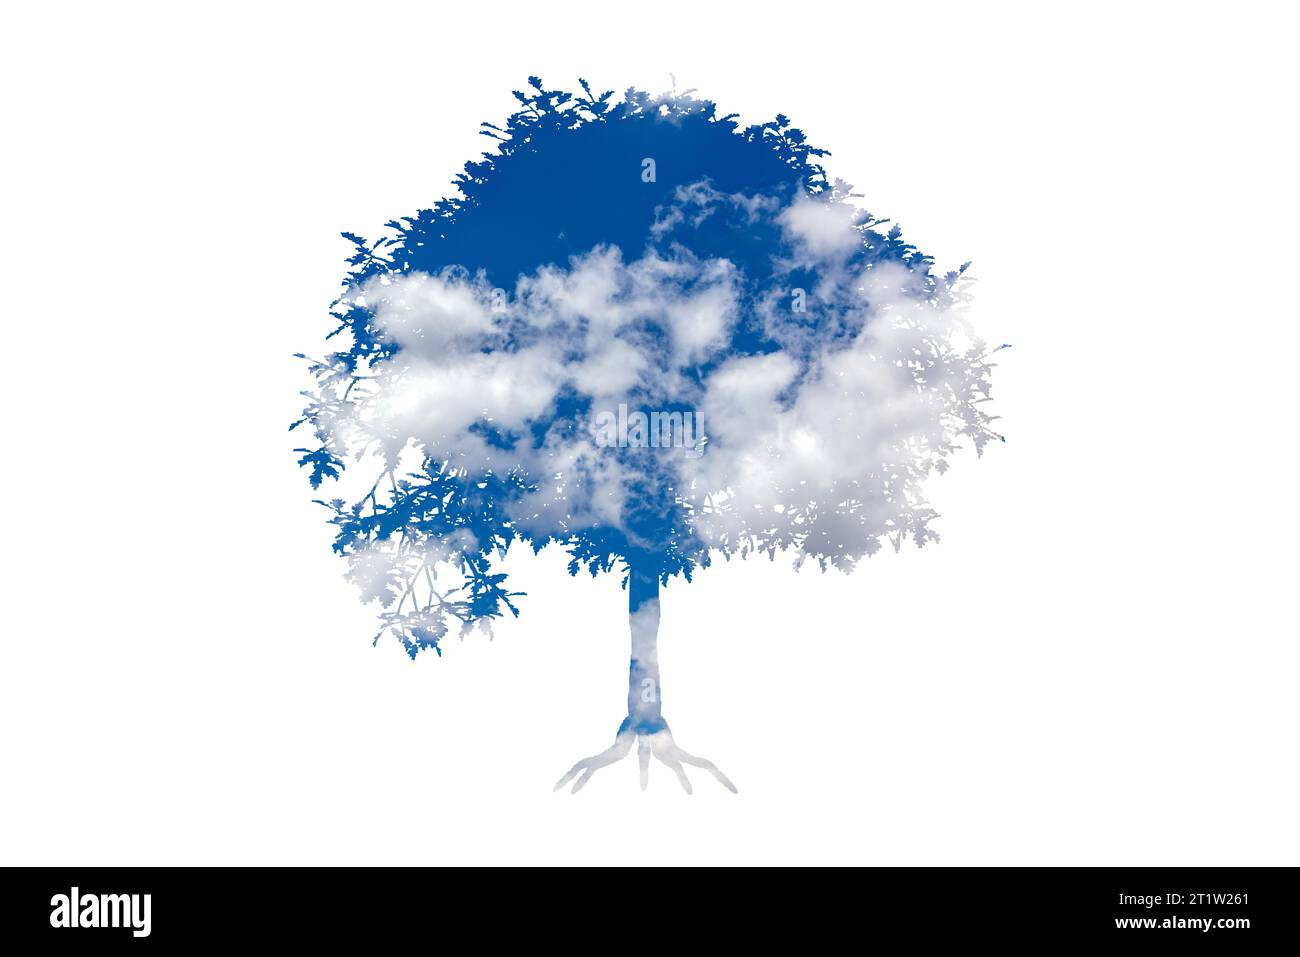 Tree icon concept of a stylized tree with leaves, lends itself to being used with text. Stock Photo